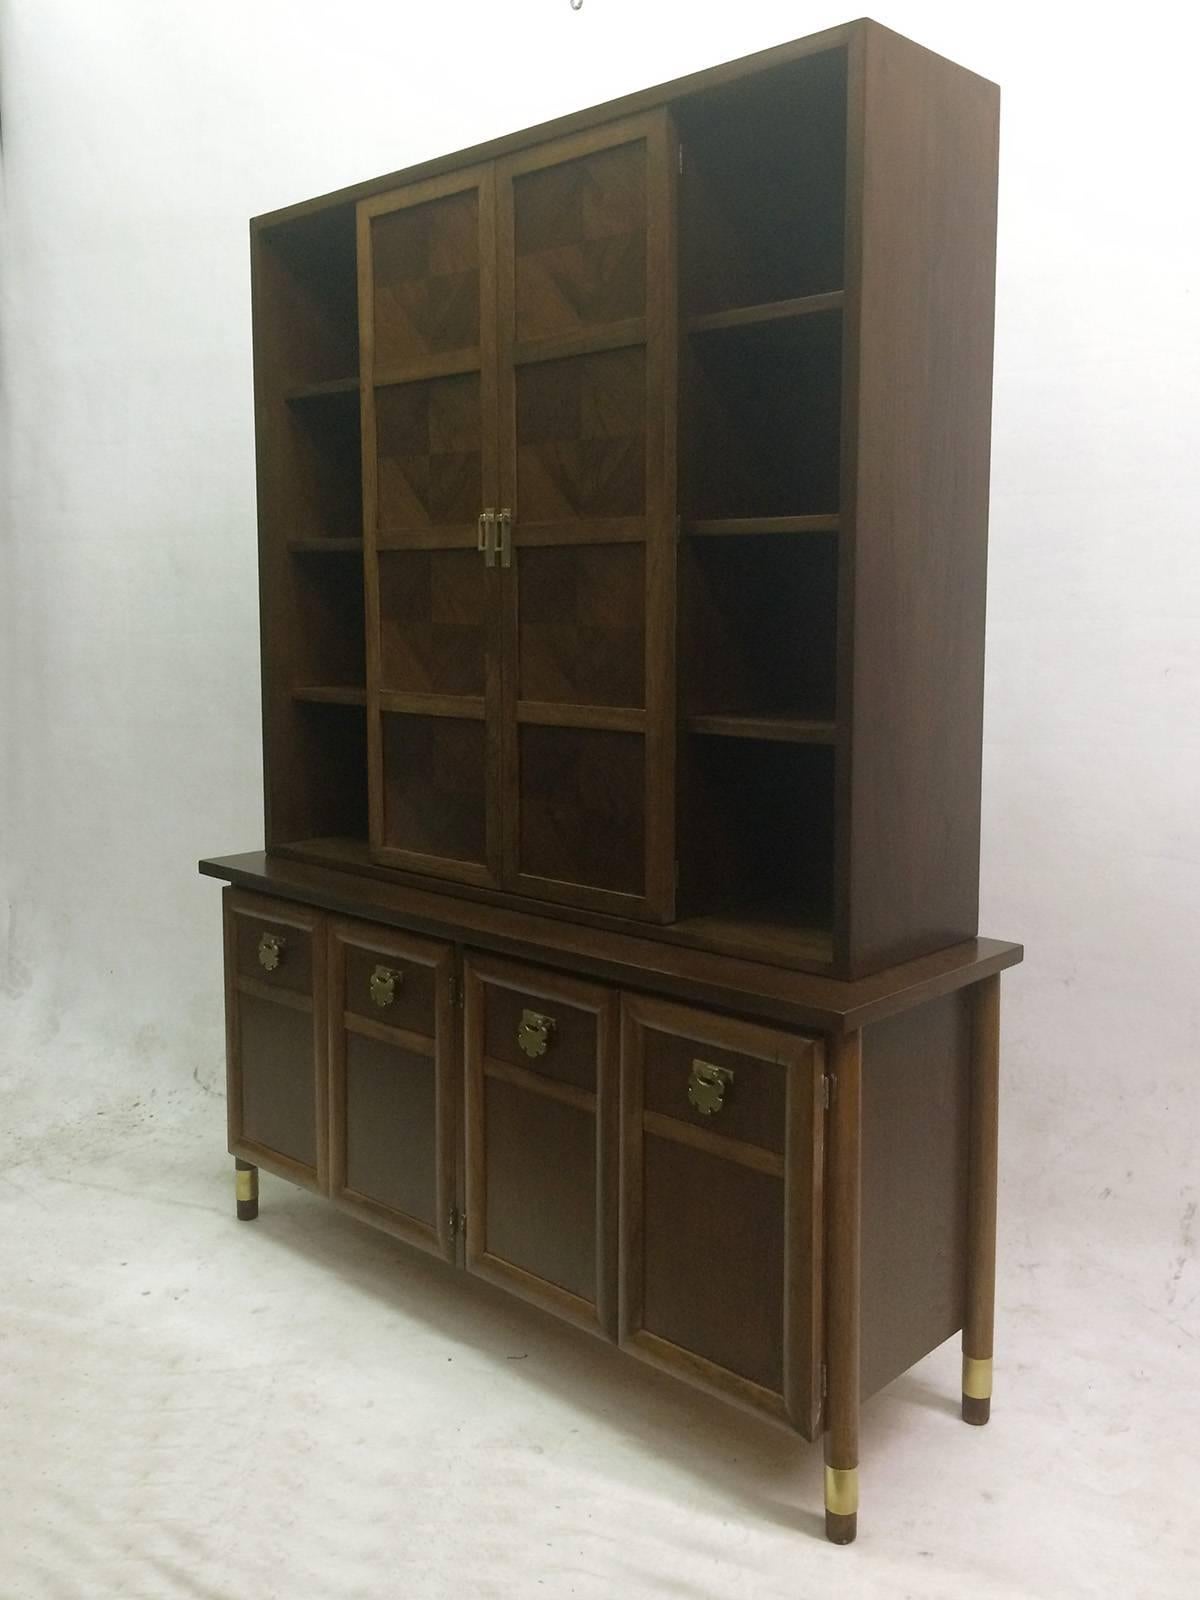 This two-tier buffet is composed of a top shelving unit and a bottom four doors cabinet. The doors handles and legs detailing are made of brass. The bottom piece has four doors - two opening to a compartment with two sections and a drop-down drawer,